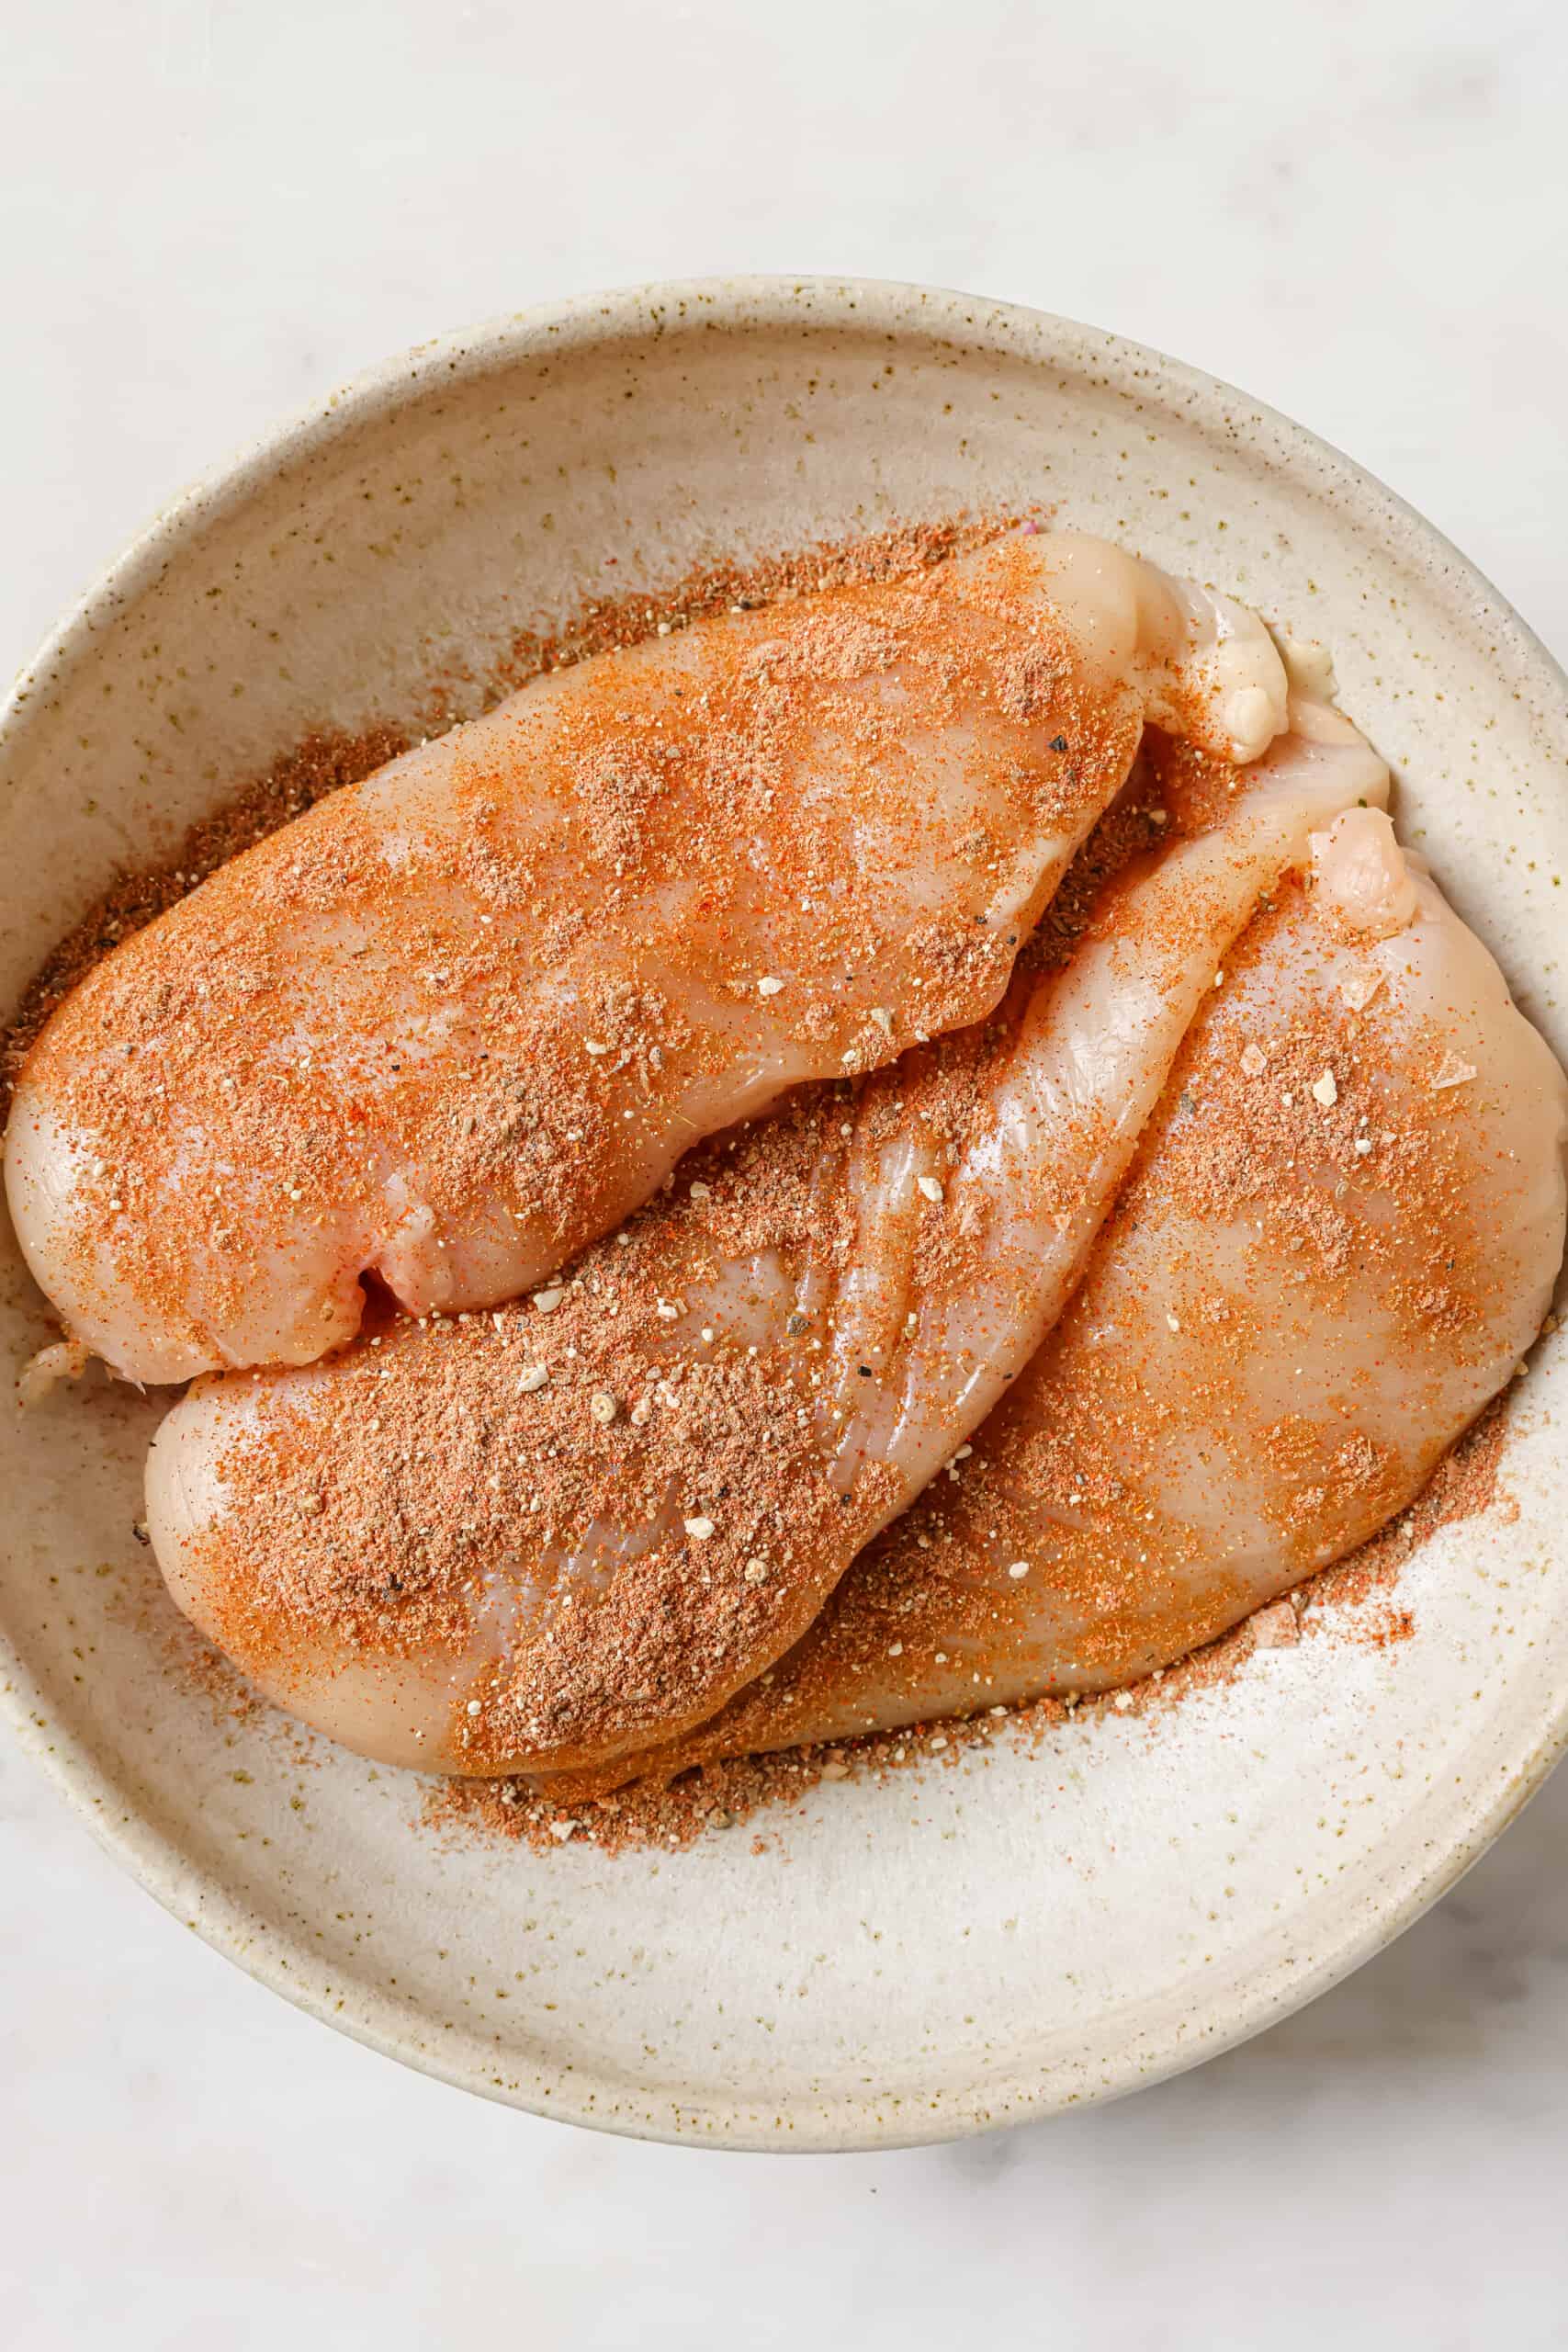 Raw chicken coated in the spice mix. 